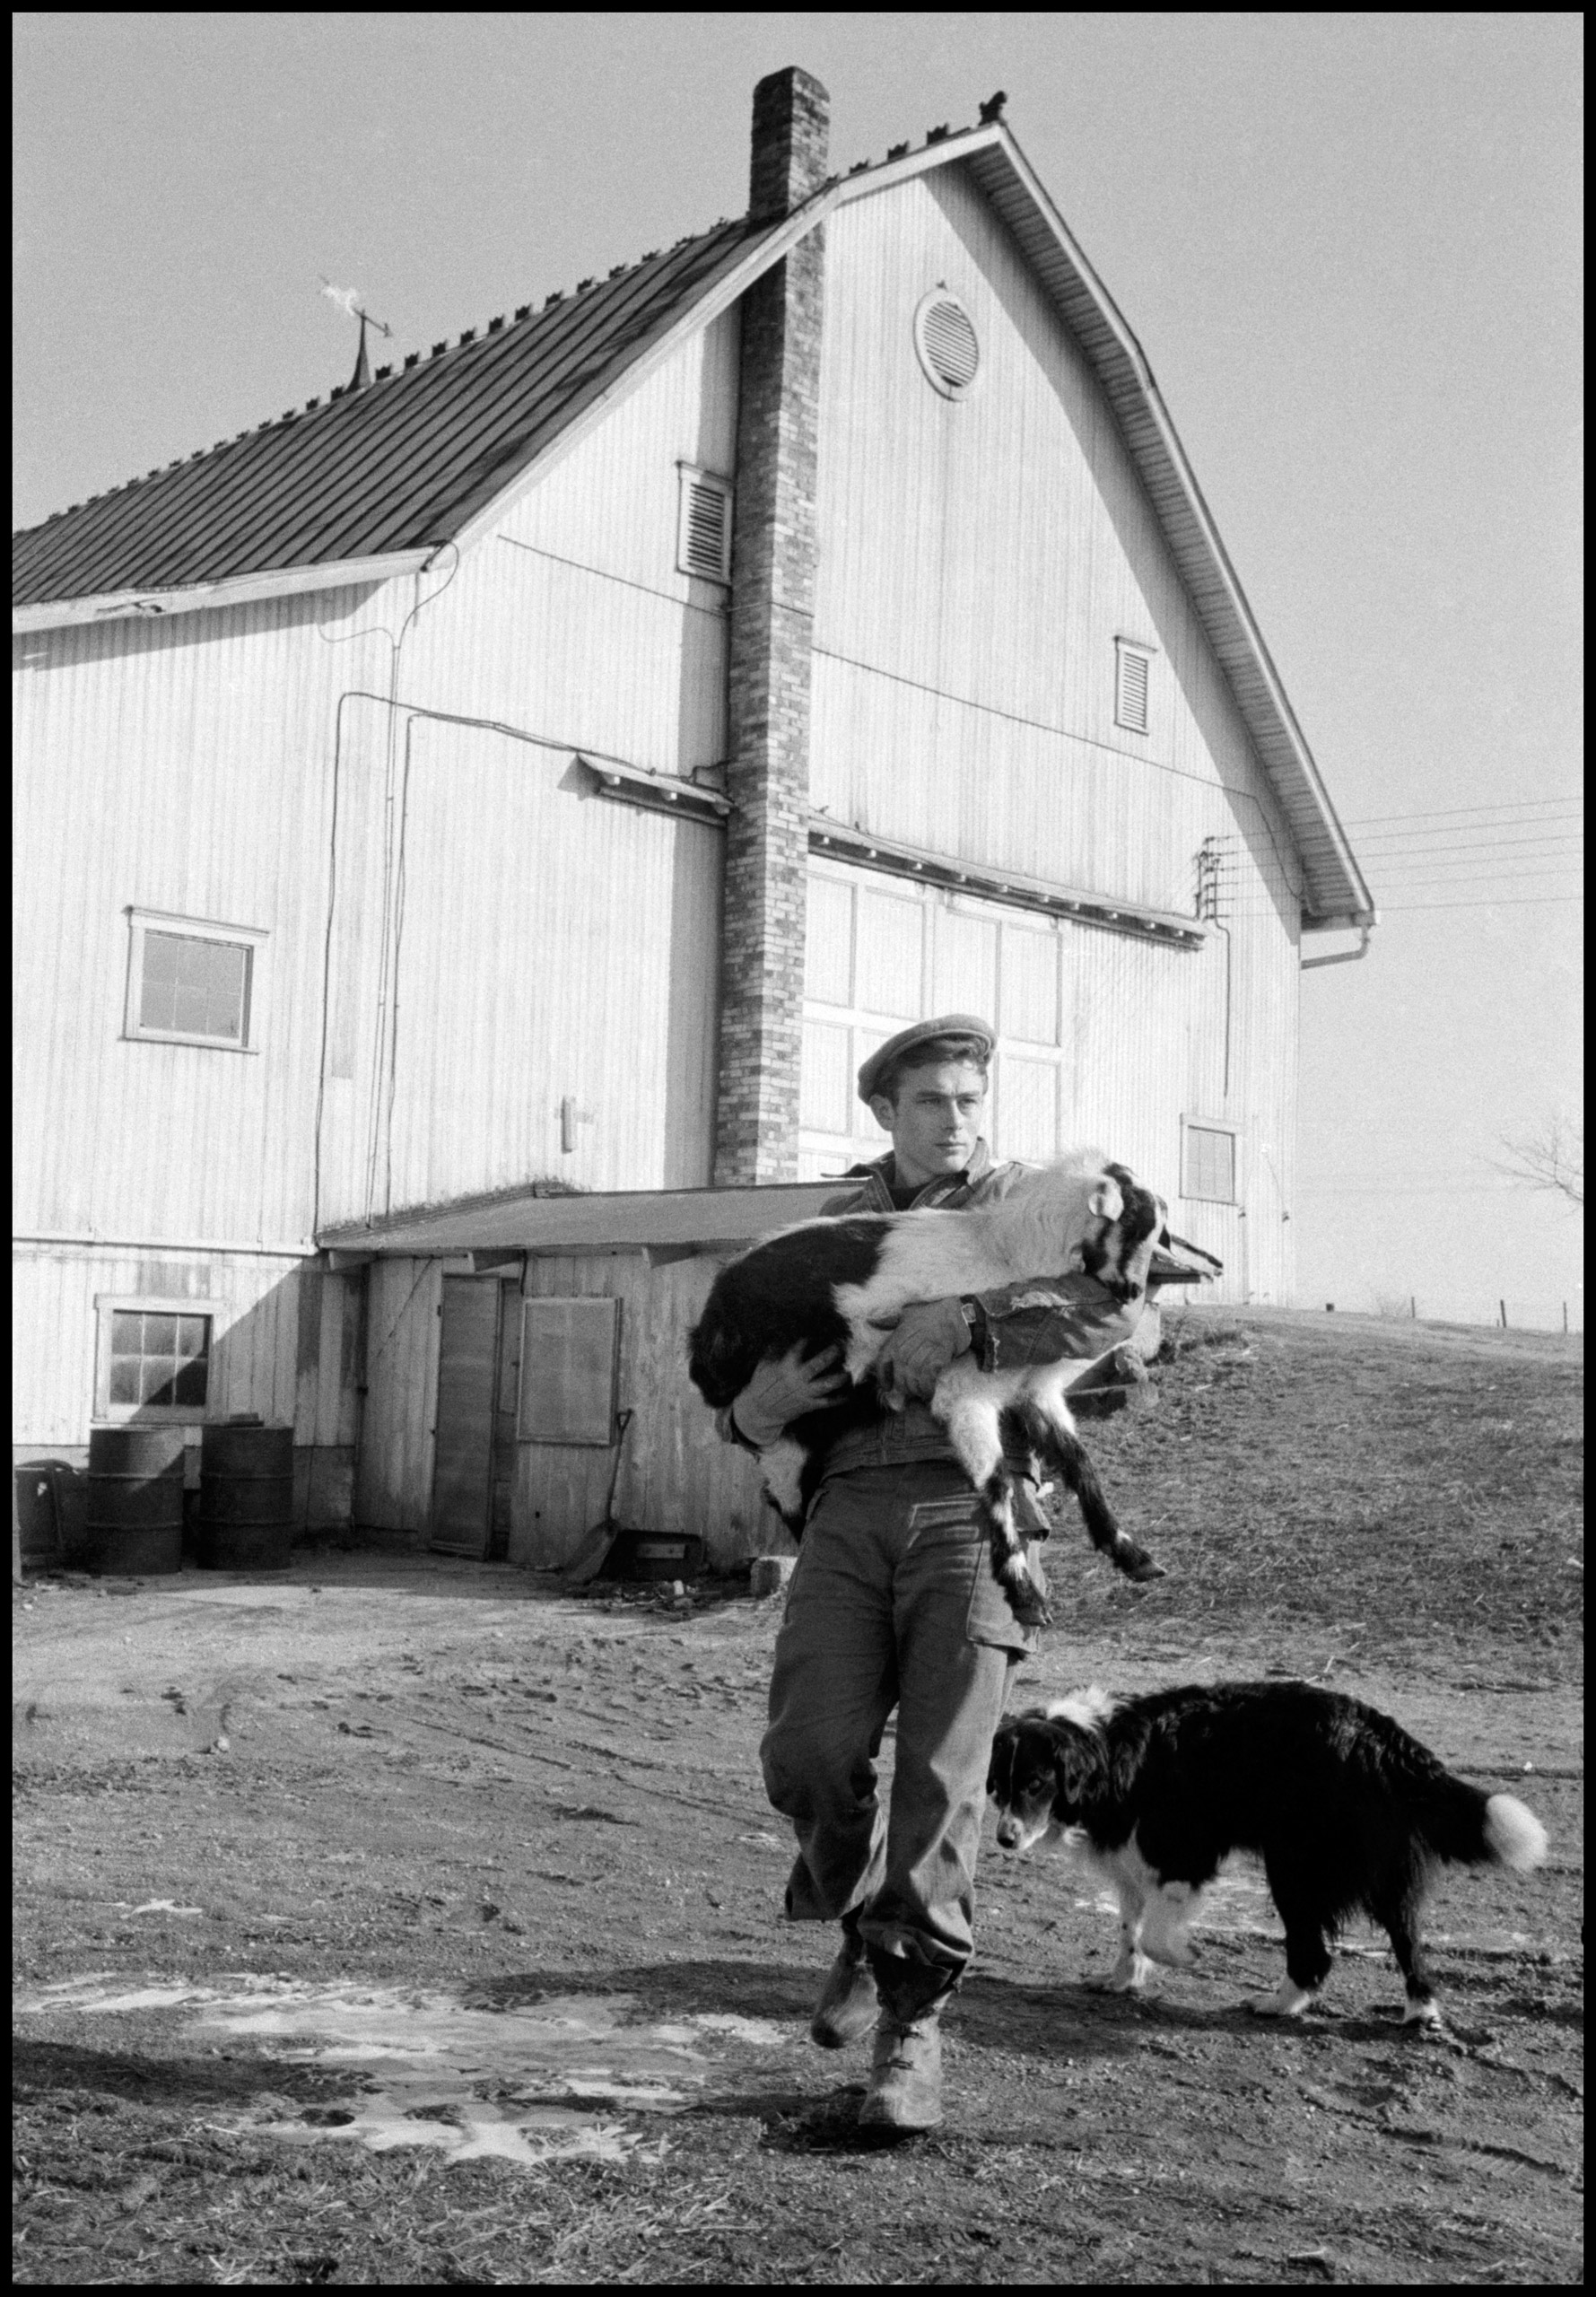 James Dean with dogs on Winslow farm in Fairmount, Indiana. 1955.